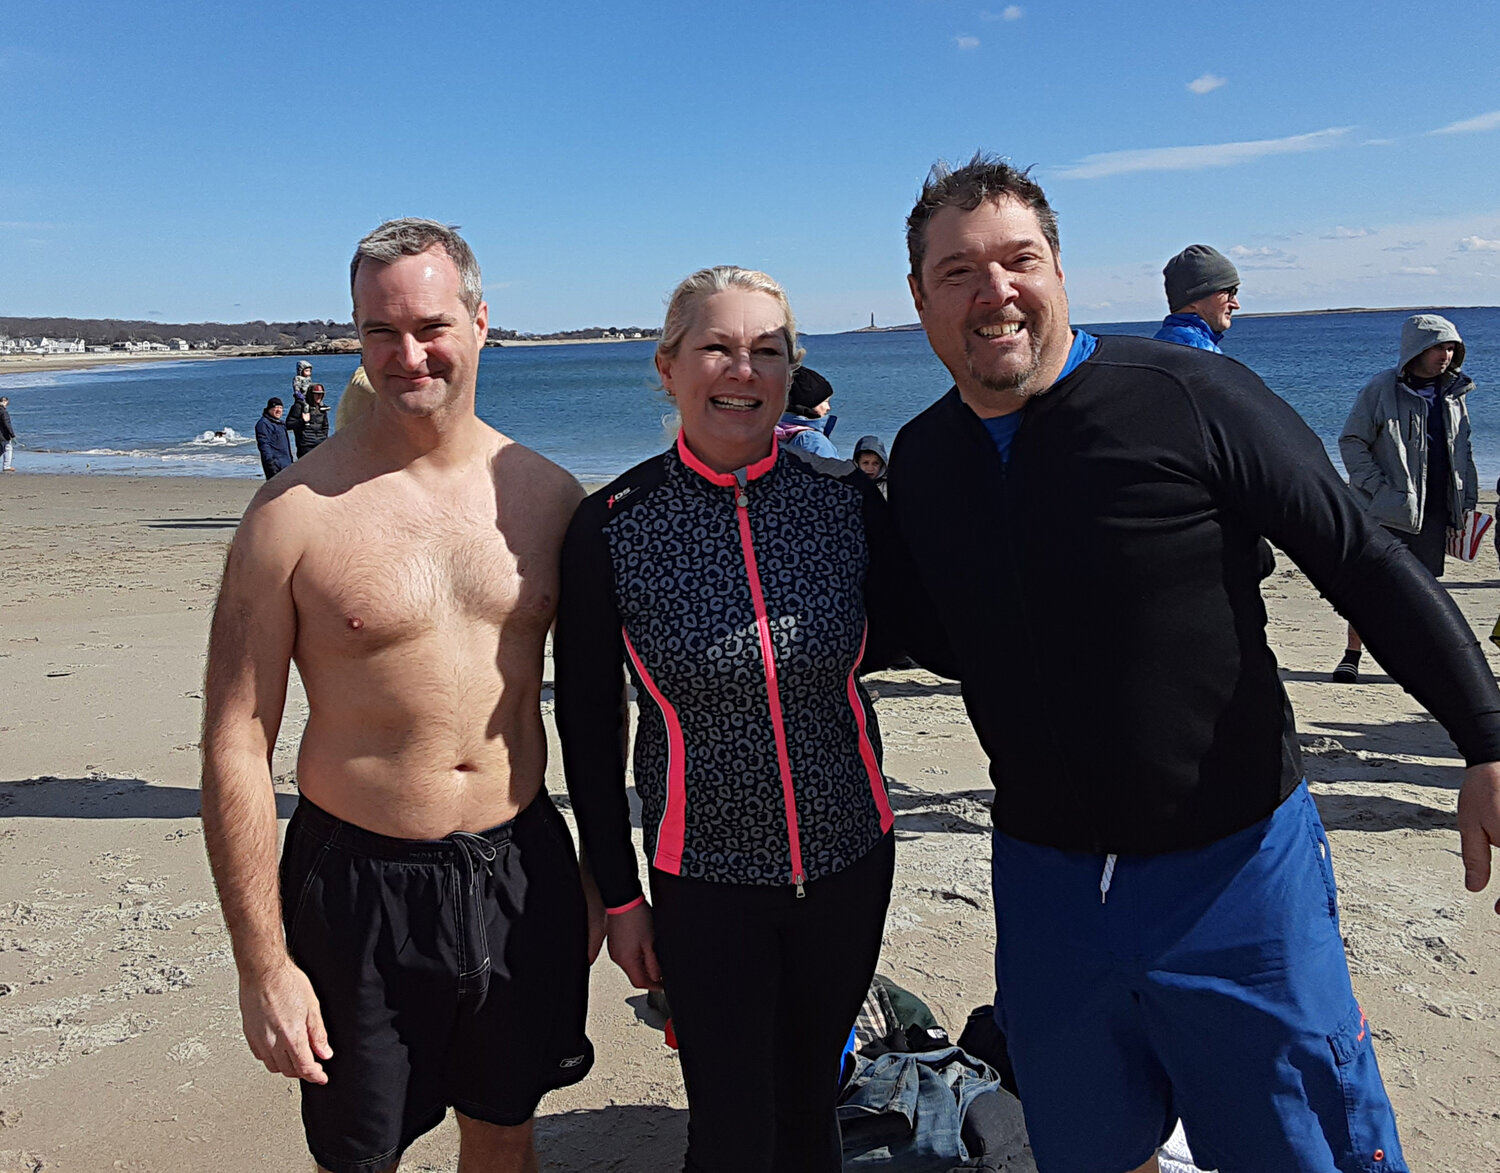 MARCH | Freezin’ For A ReasonLocal Rotarians made the leap to eradicate polio on Leap Day, February 29, at Good Harbor Beach in Gloucester.  Brian DesRosiers from Essex, Joanne Donnelly and Stephen Laspesa (both from Manchester) jumped into the frigid waters as part of the annual Polar Plunge sponsored by Rotary International District 7930.  All donations were matched by the Gates Foundation. 